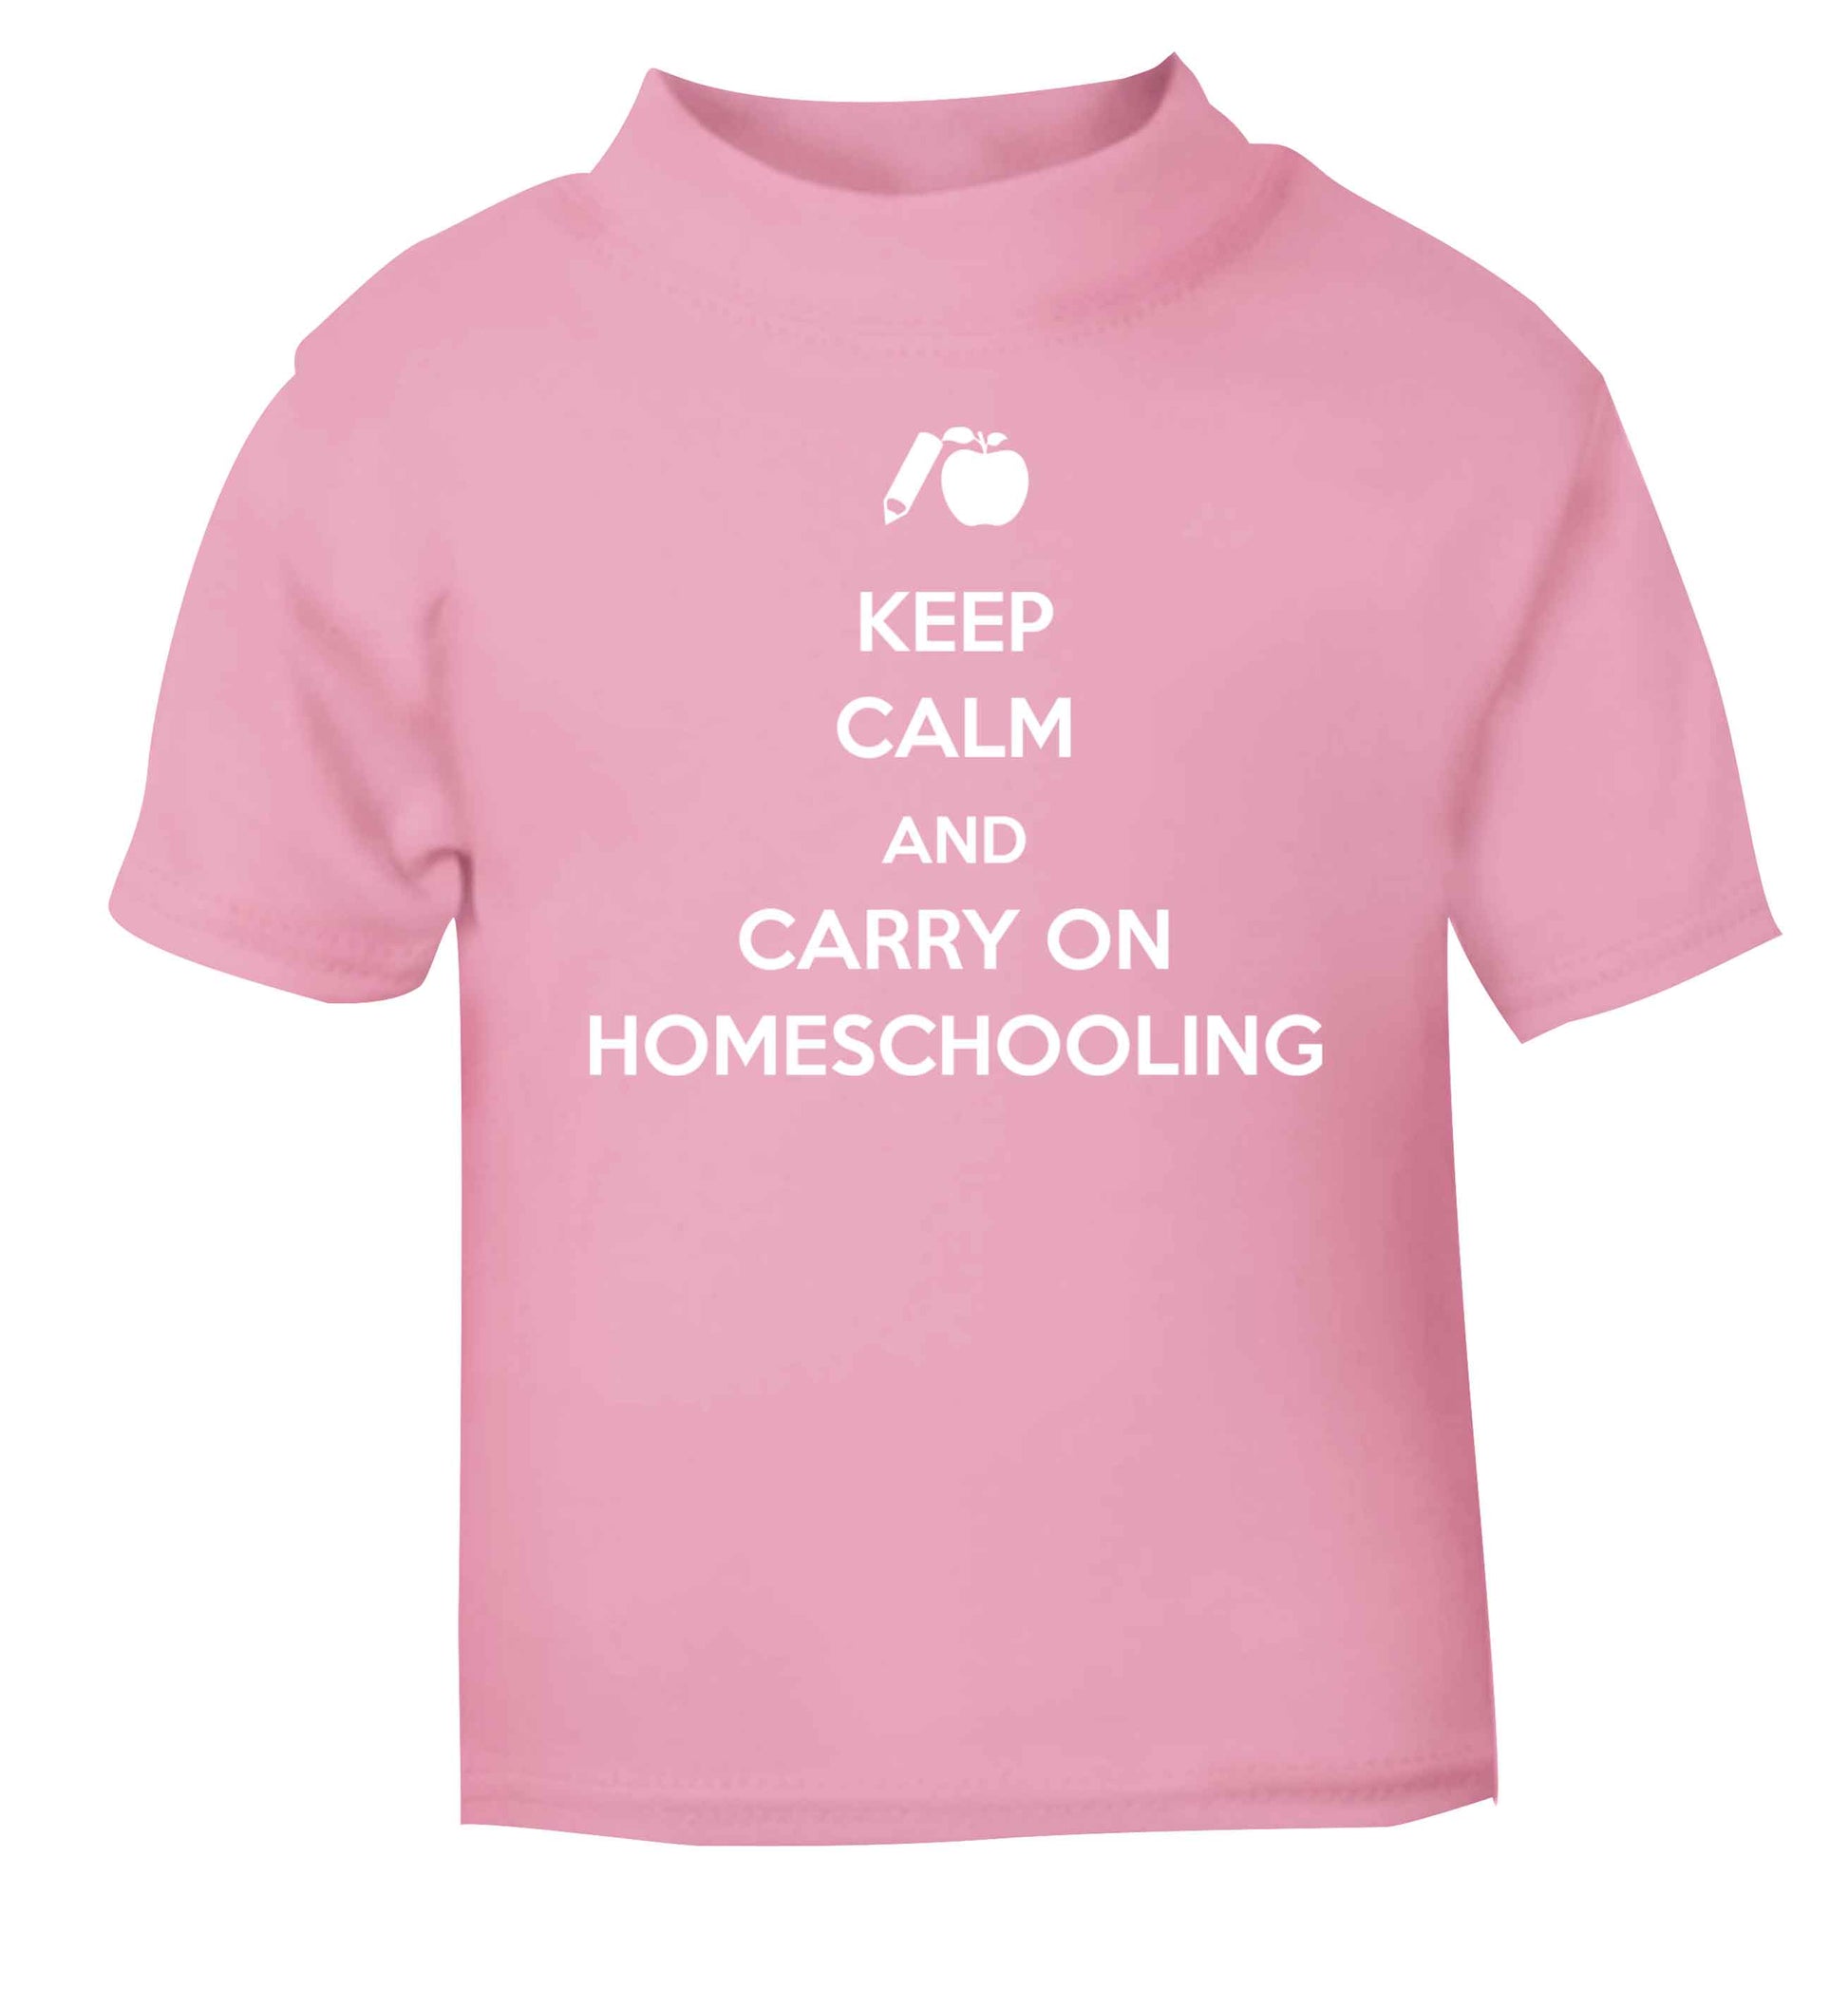 Keep calm and carry on homeschooling light pink Baby Toddler Tshirt 2 Years